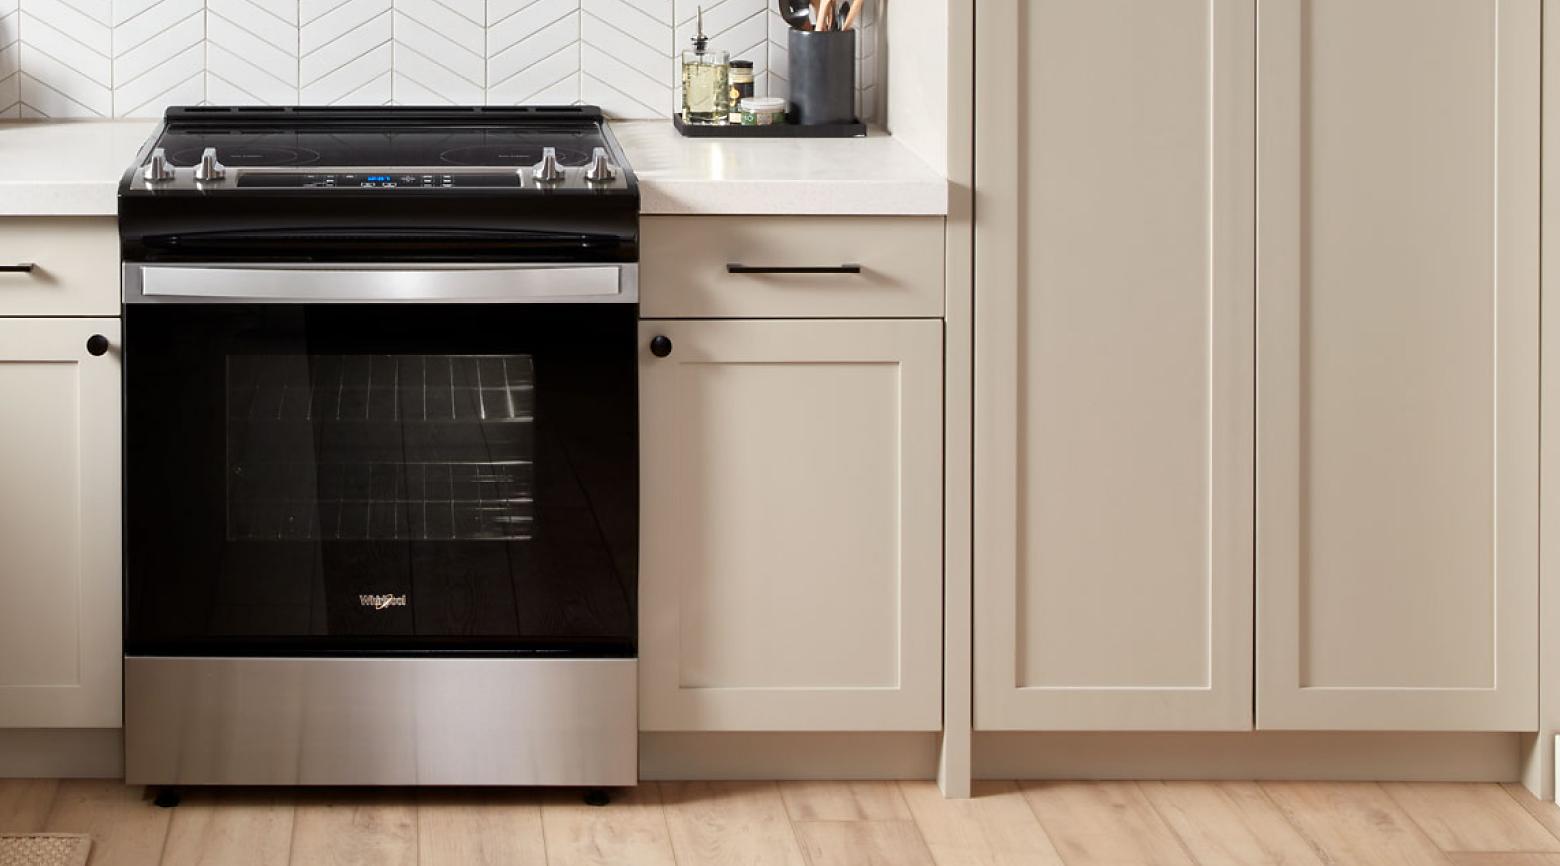 Whirlpool® Electric Range in a kitchen